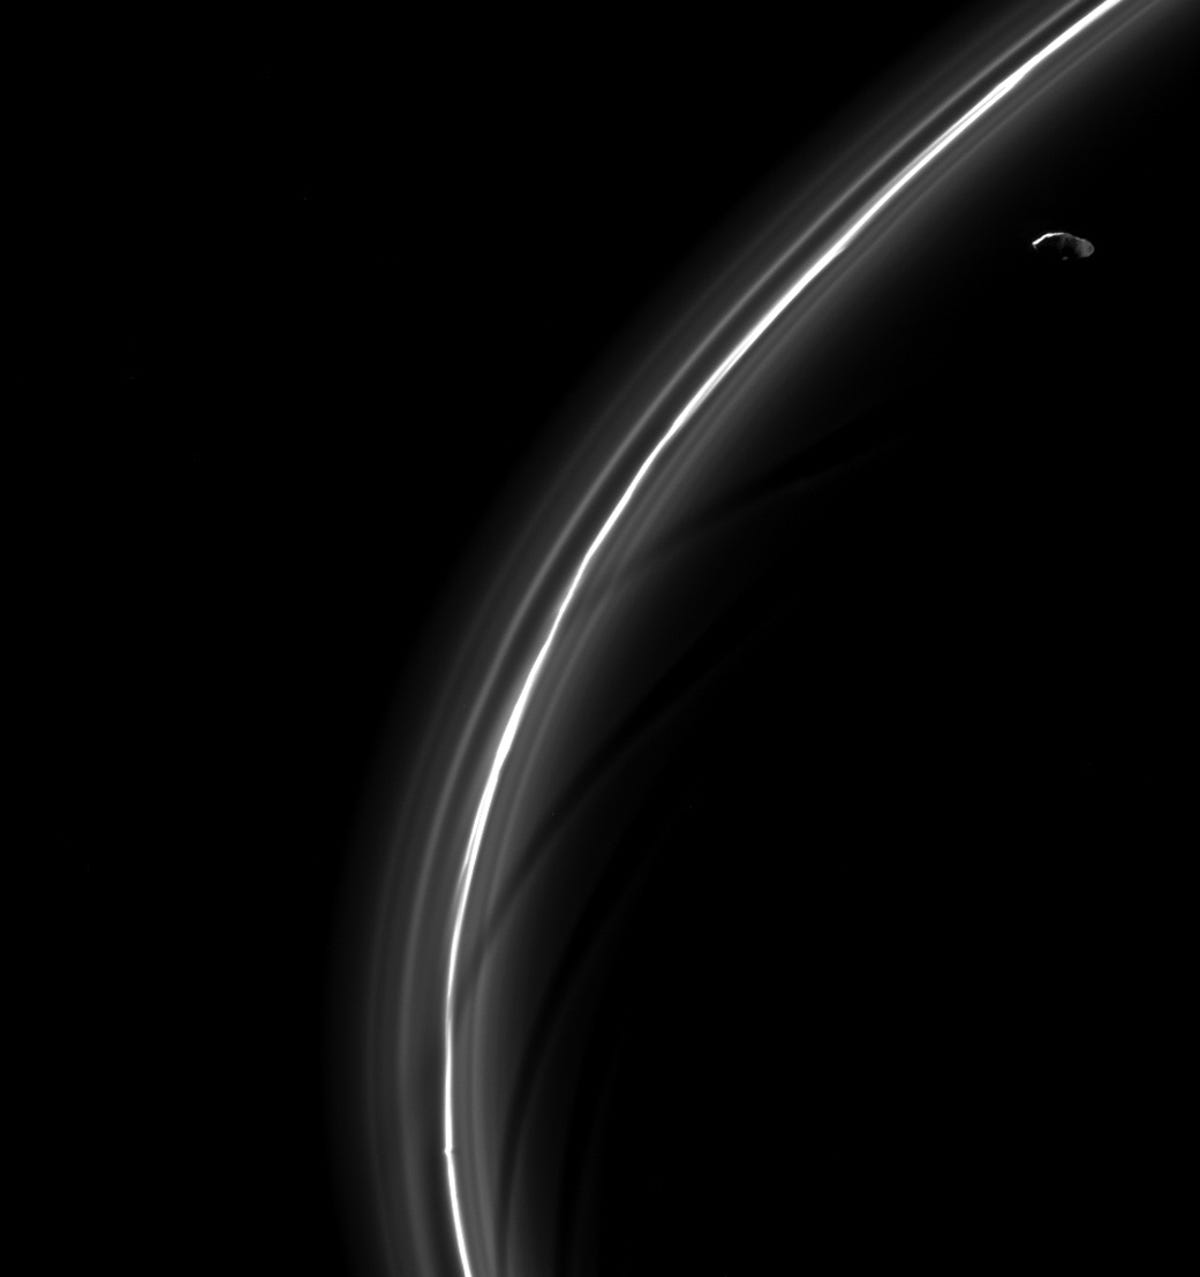 Prometheus poses with Saturn's F ring